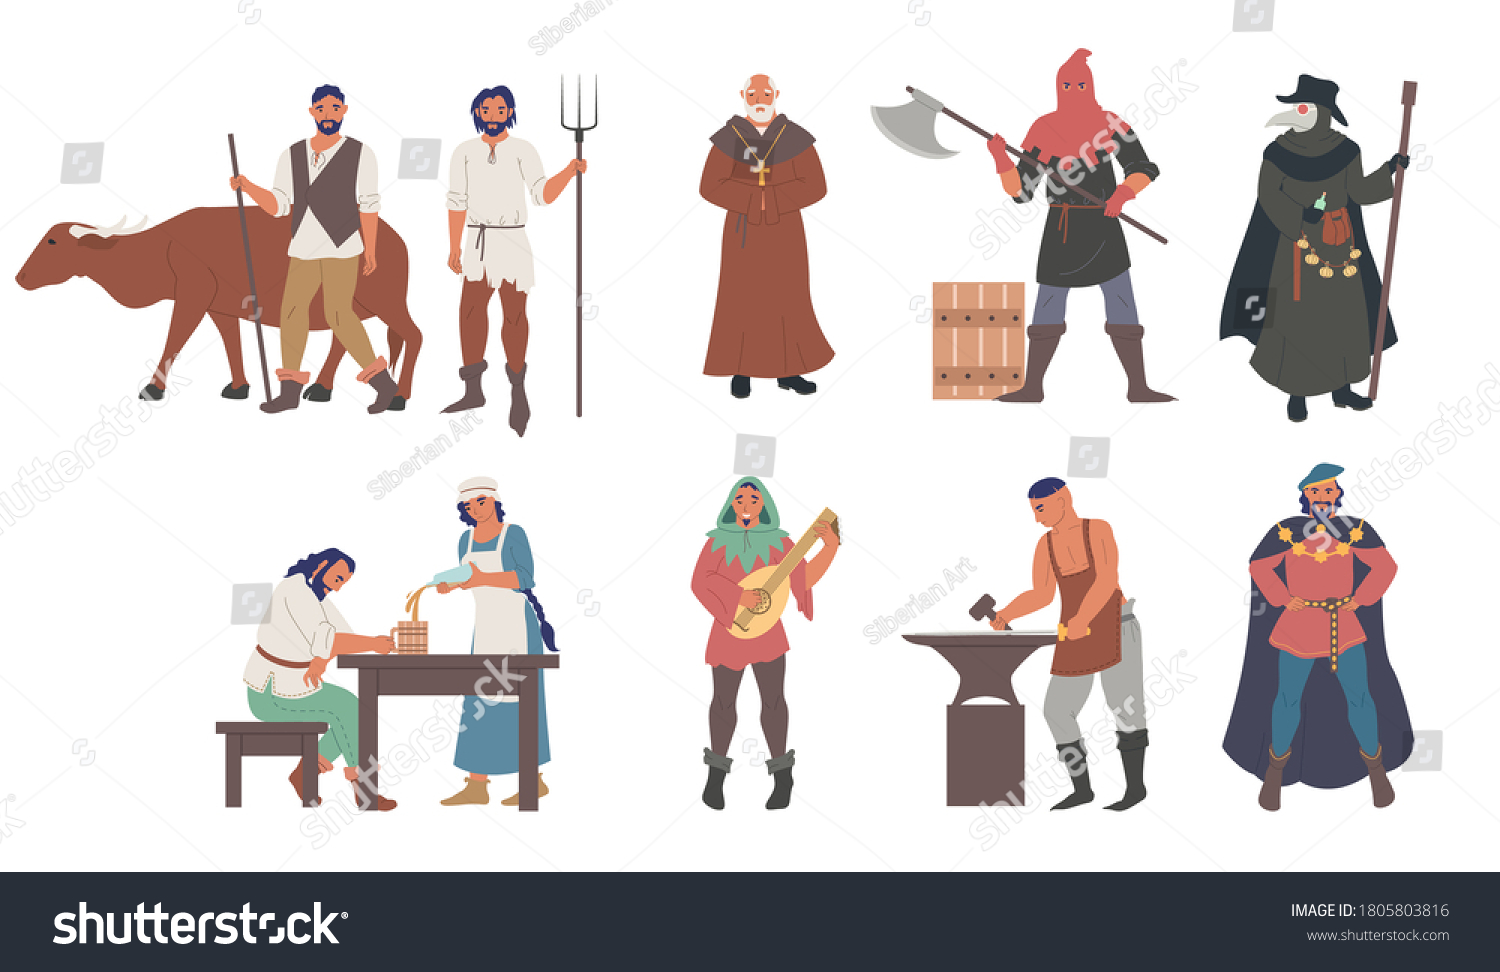 SVG of Medieval people male and female cartoon character set flat vector isolated illustration. Priest, peasants, executioner, plague doctor, blacksmith, musician, minstrel, royal courtier. Medieval clothing svg